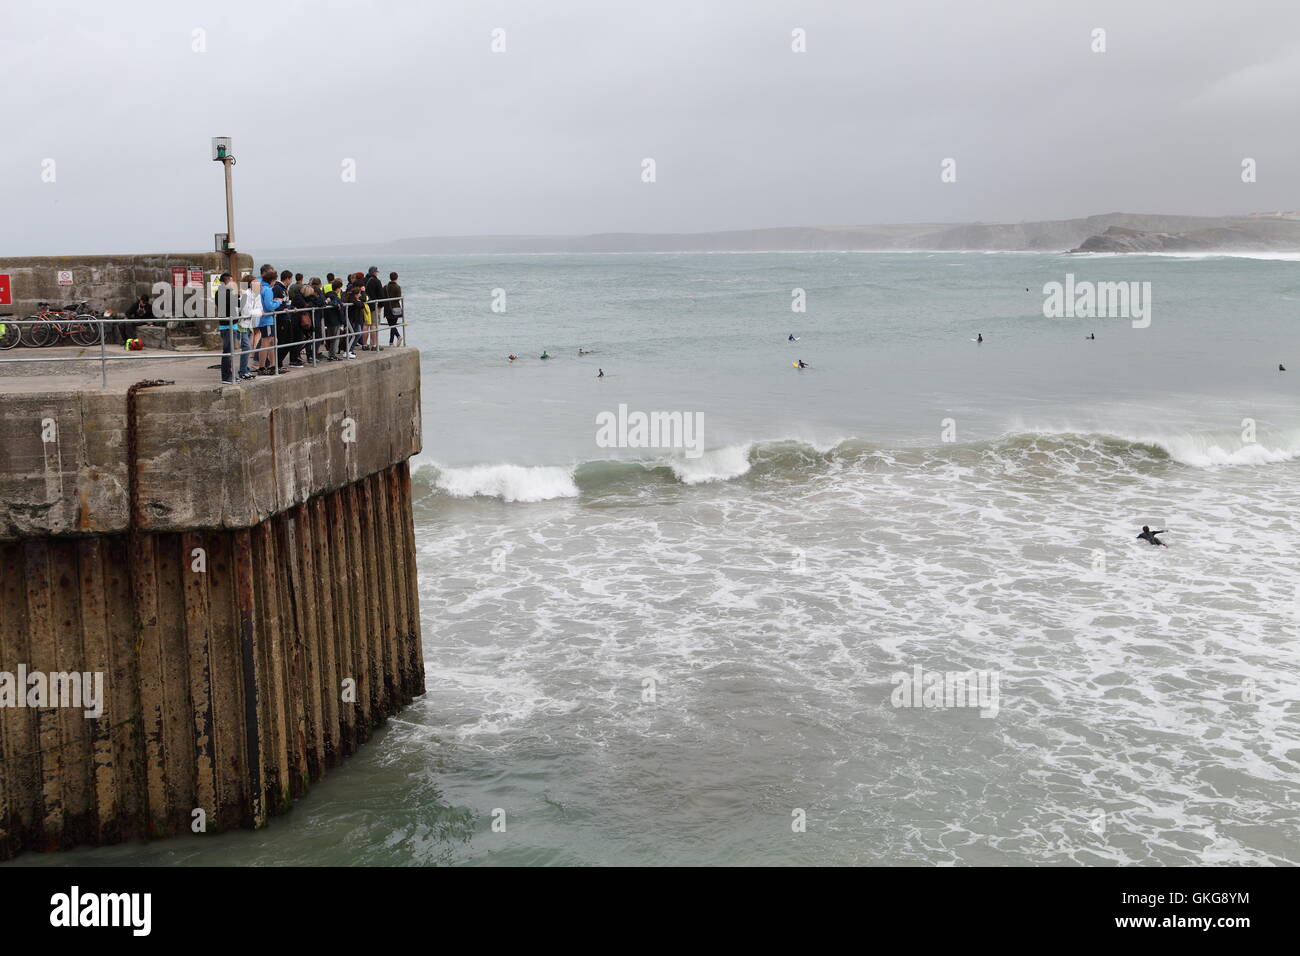 TOWAN BEACH, NEWQUAY, CORNWALL, UK - August 20, 2016: Gale force winds produce large waves enjoyed by surfers at Towan Beach. Newquay is one of the major surfing tourist attractions in the UK. Stock Photo